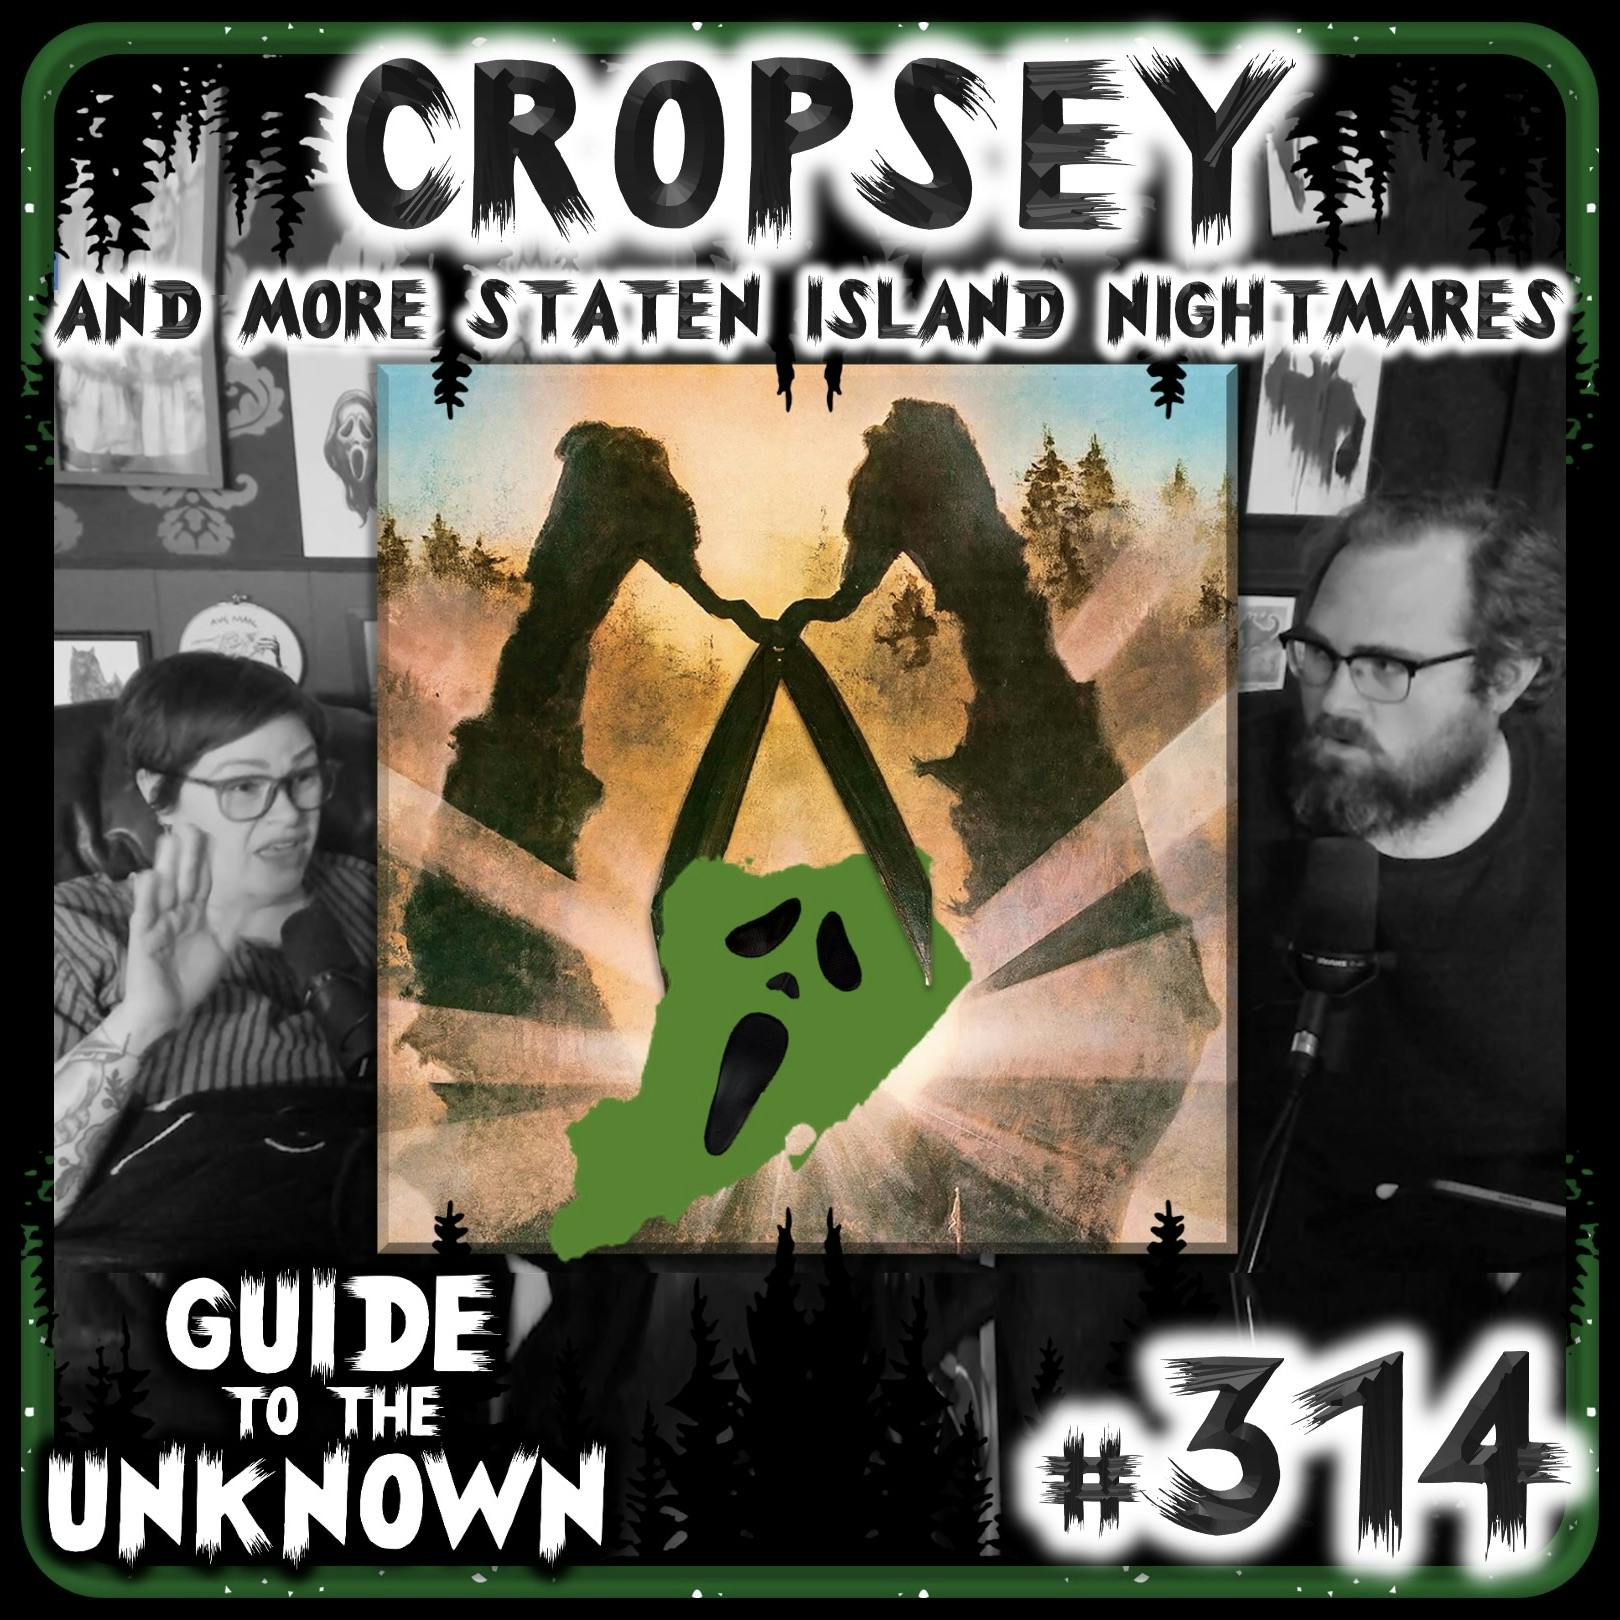 314: CROPSEY and more Staten Island Nightmares